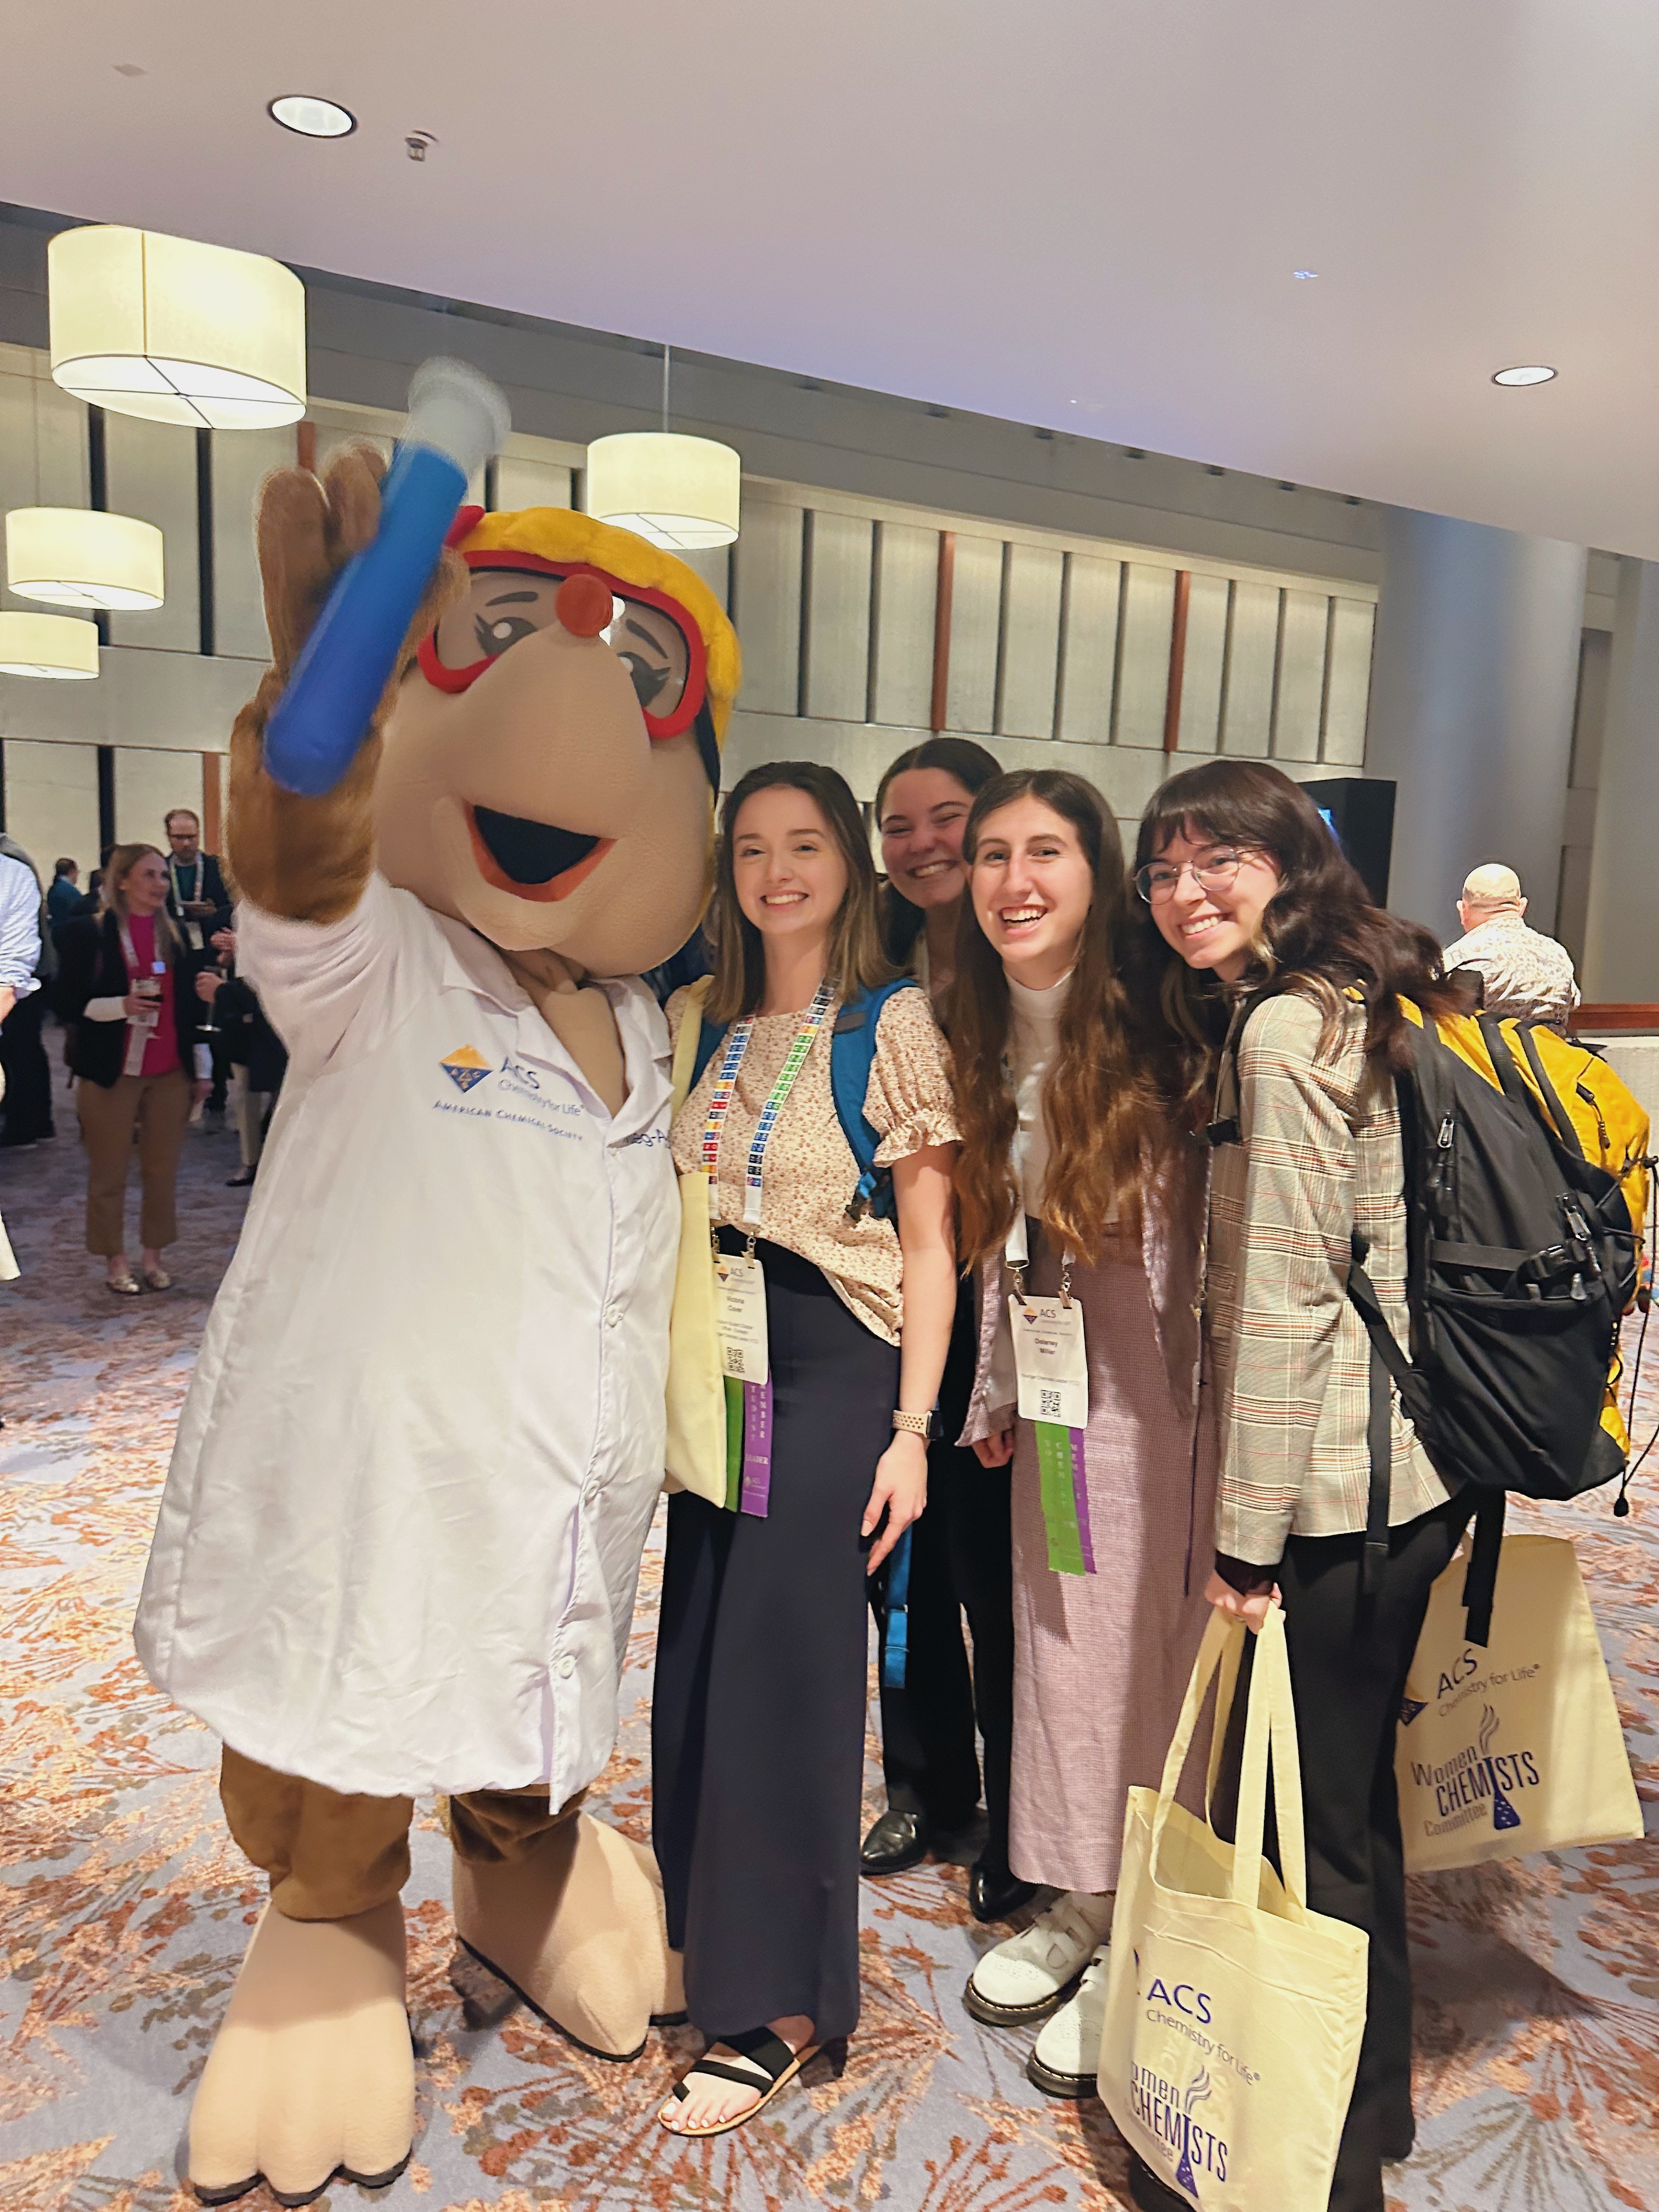 The ACS mascot Prof. Molenium hanging out with students at the ACS Leadership Institute.